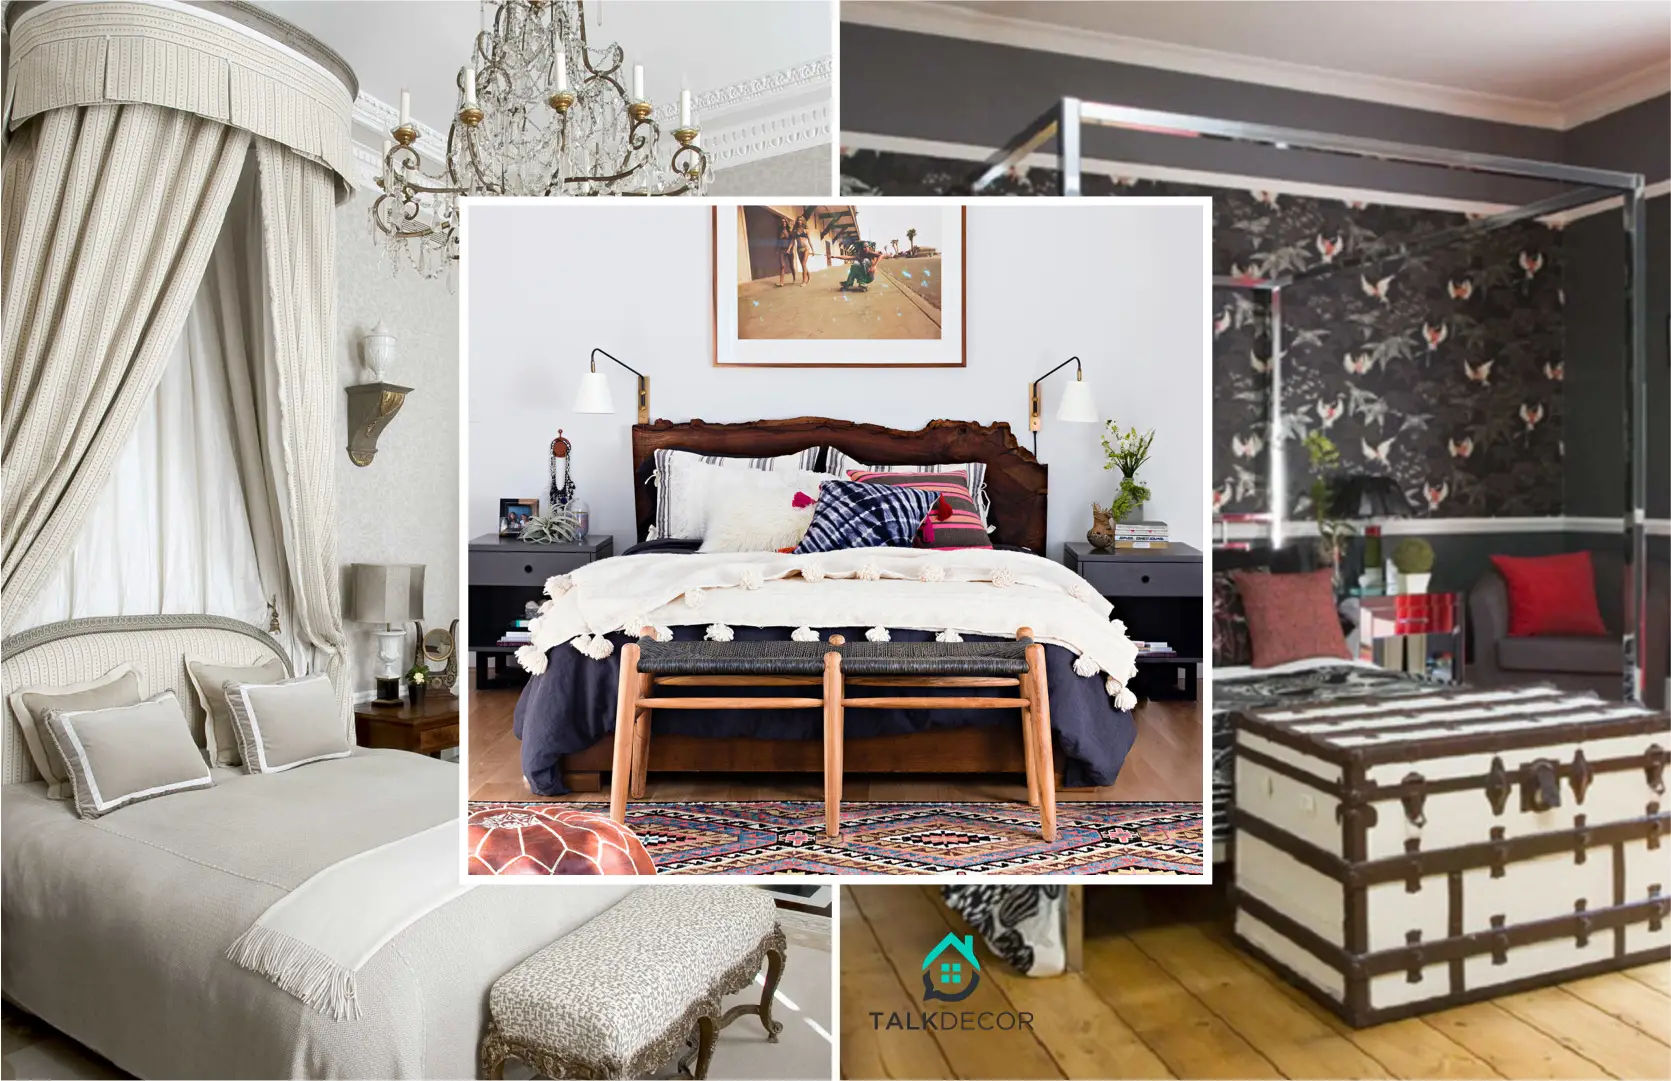 Upgrade Your Master Bedroom Now with These Ideas